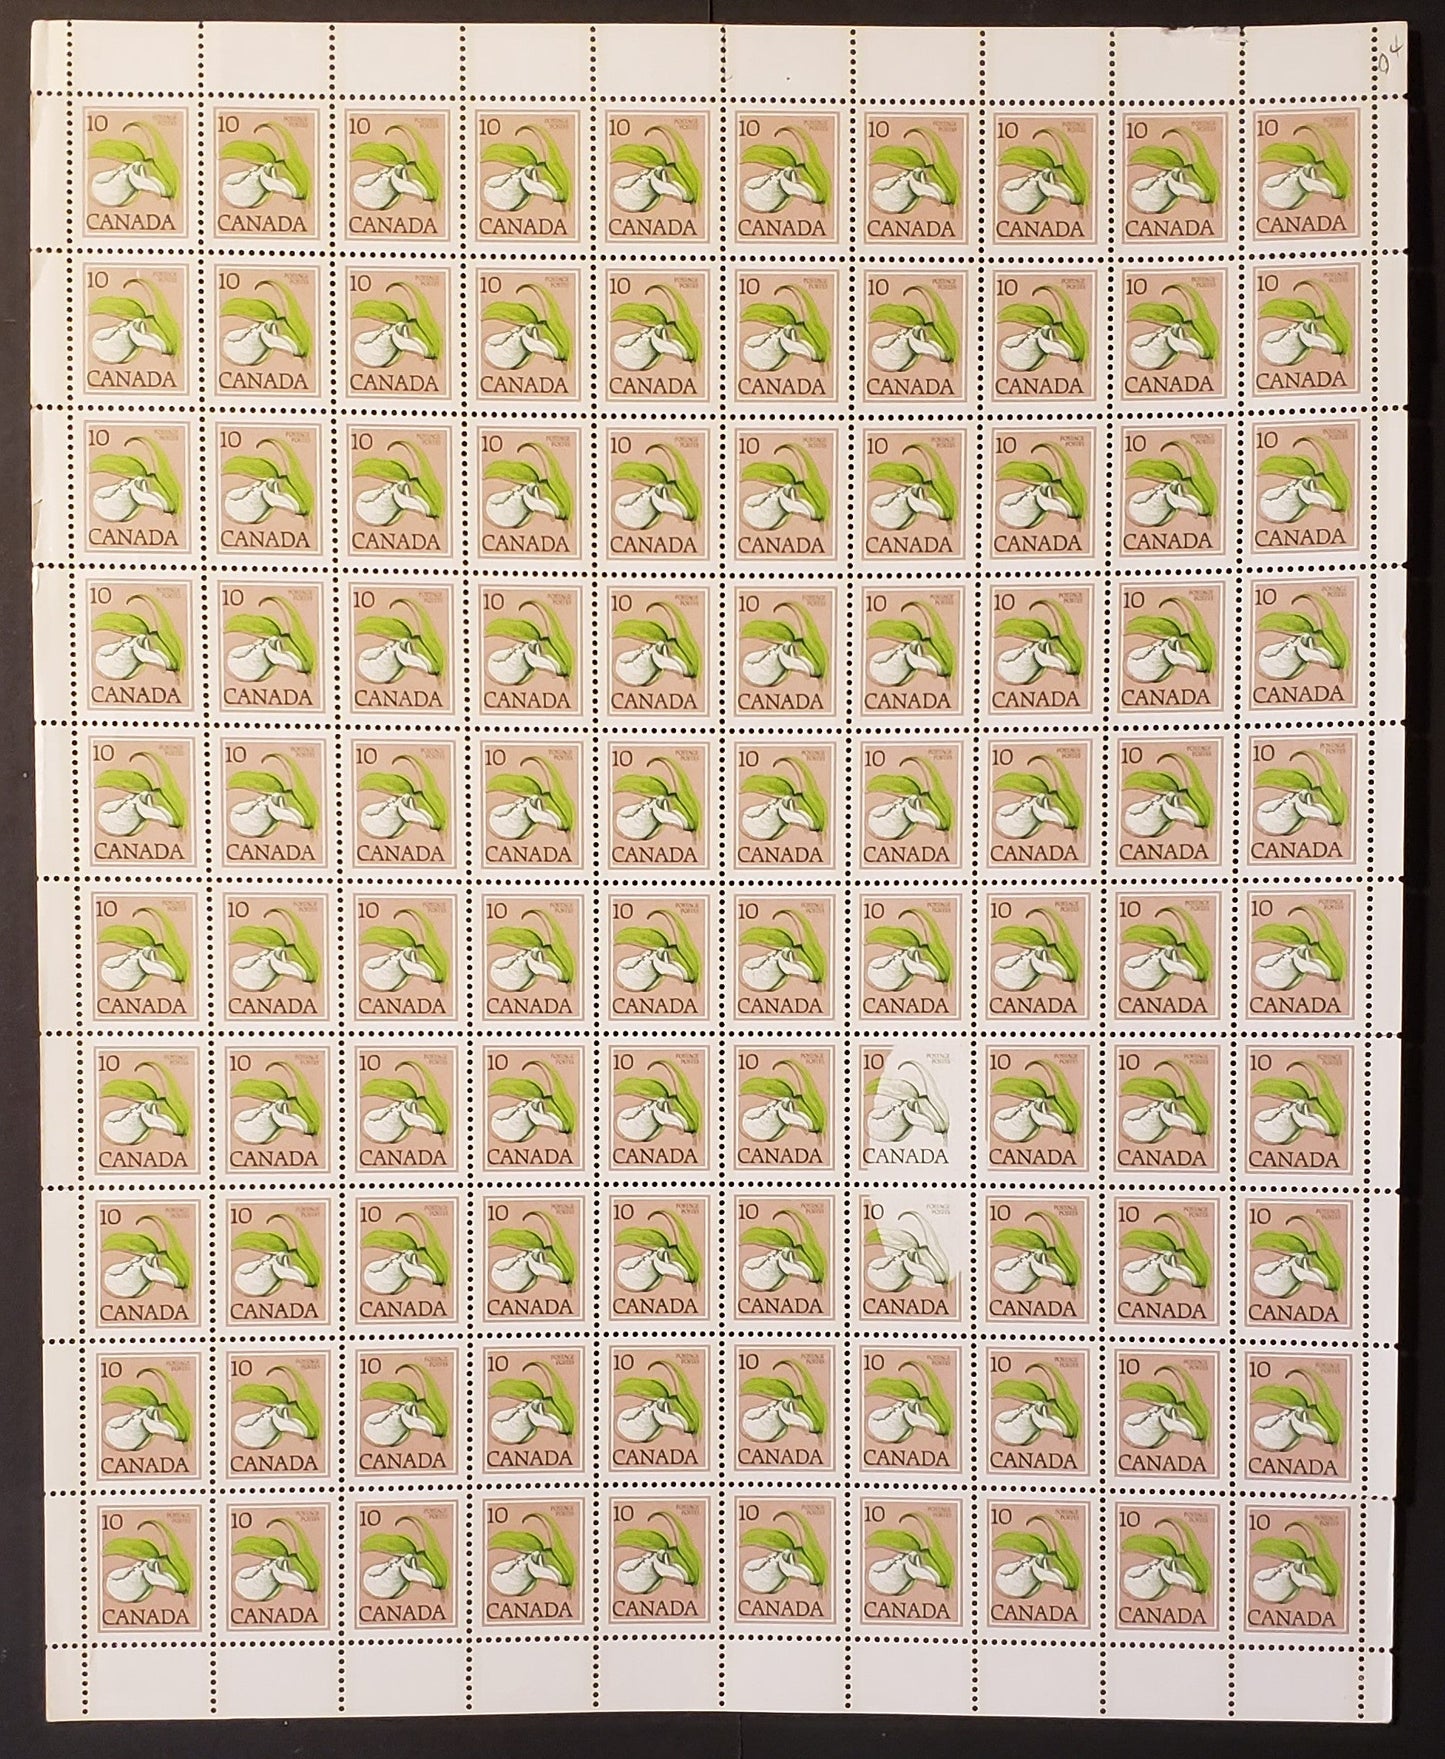 Lot 9 Canada #711a 10c Ochre & Multicoloured Lady's Slipper, 1977 Floral Definitives, A VFNH Full Sheet Field Stock Sheet of 100 Showing Dramatic Repellex Error on Positions 67-68 and 77